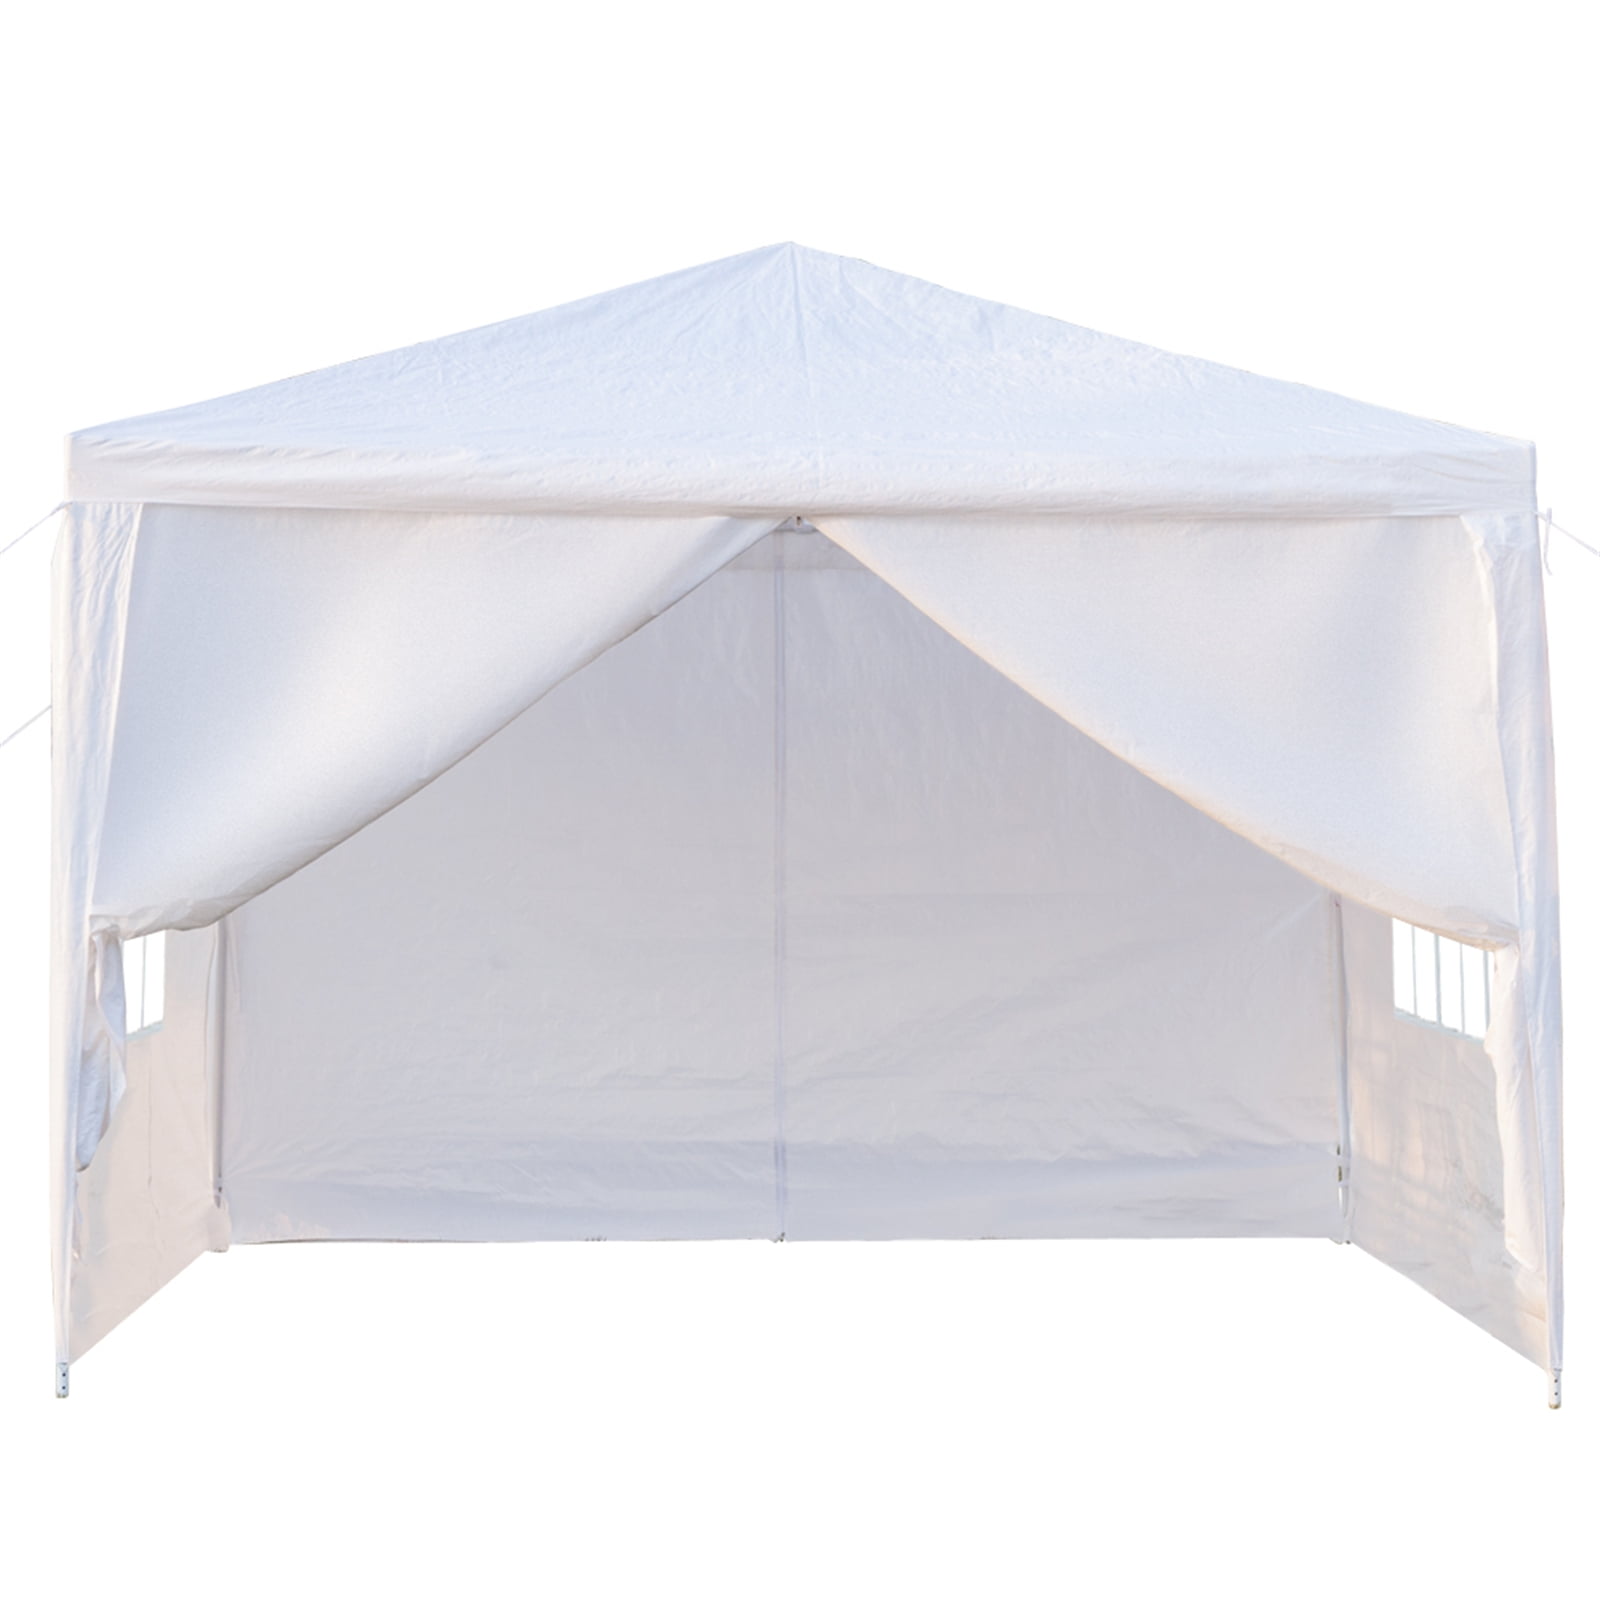 10ft x 10ft （3 x 3m ） Waterproof 3 Sides Shade Canopy Tent with Spiral Tubes White Single Tent Household Wedding 3 Sides 